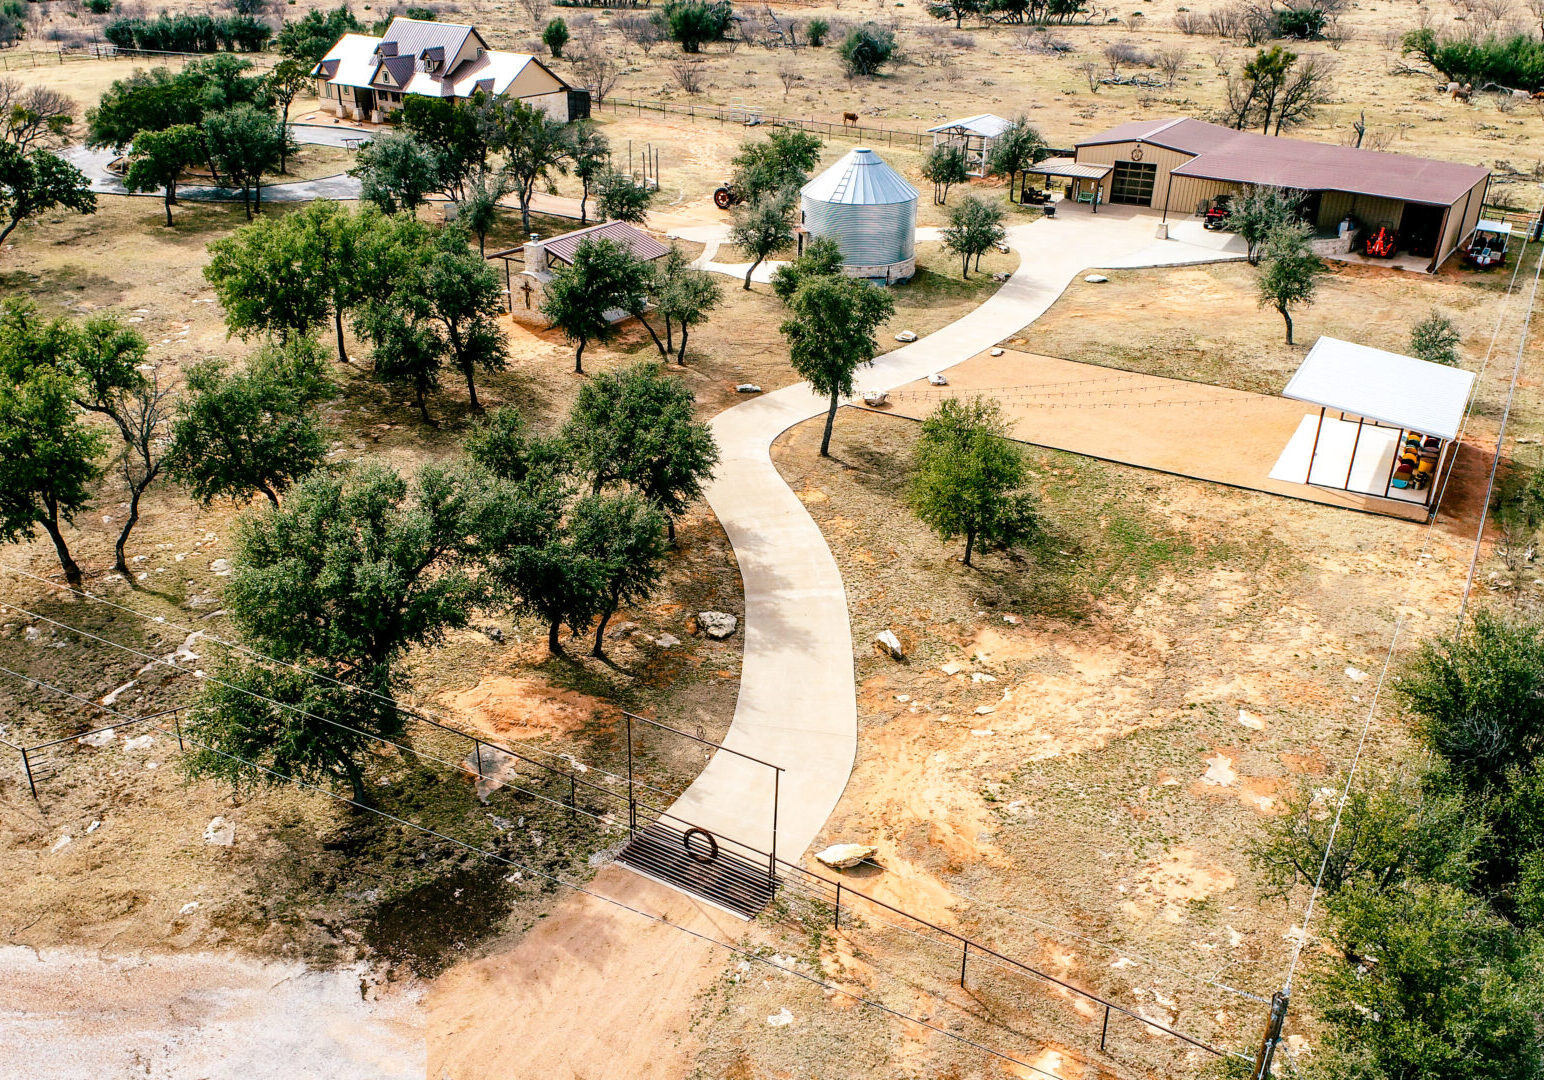 A bird 's eye view of an area with trees and a walkway.